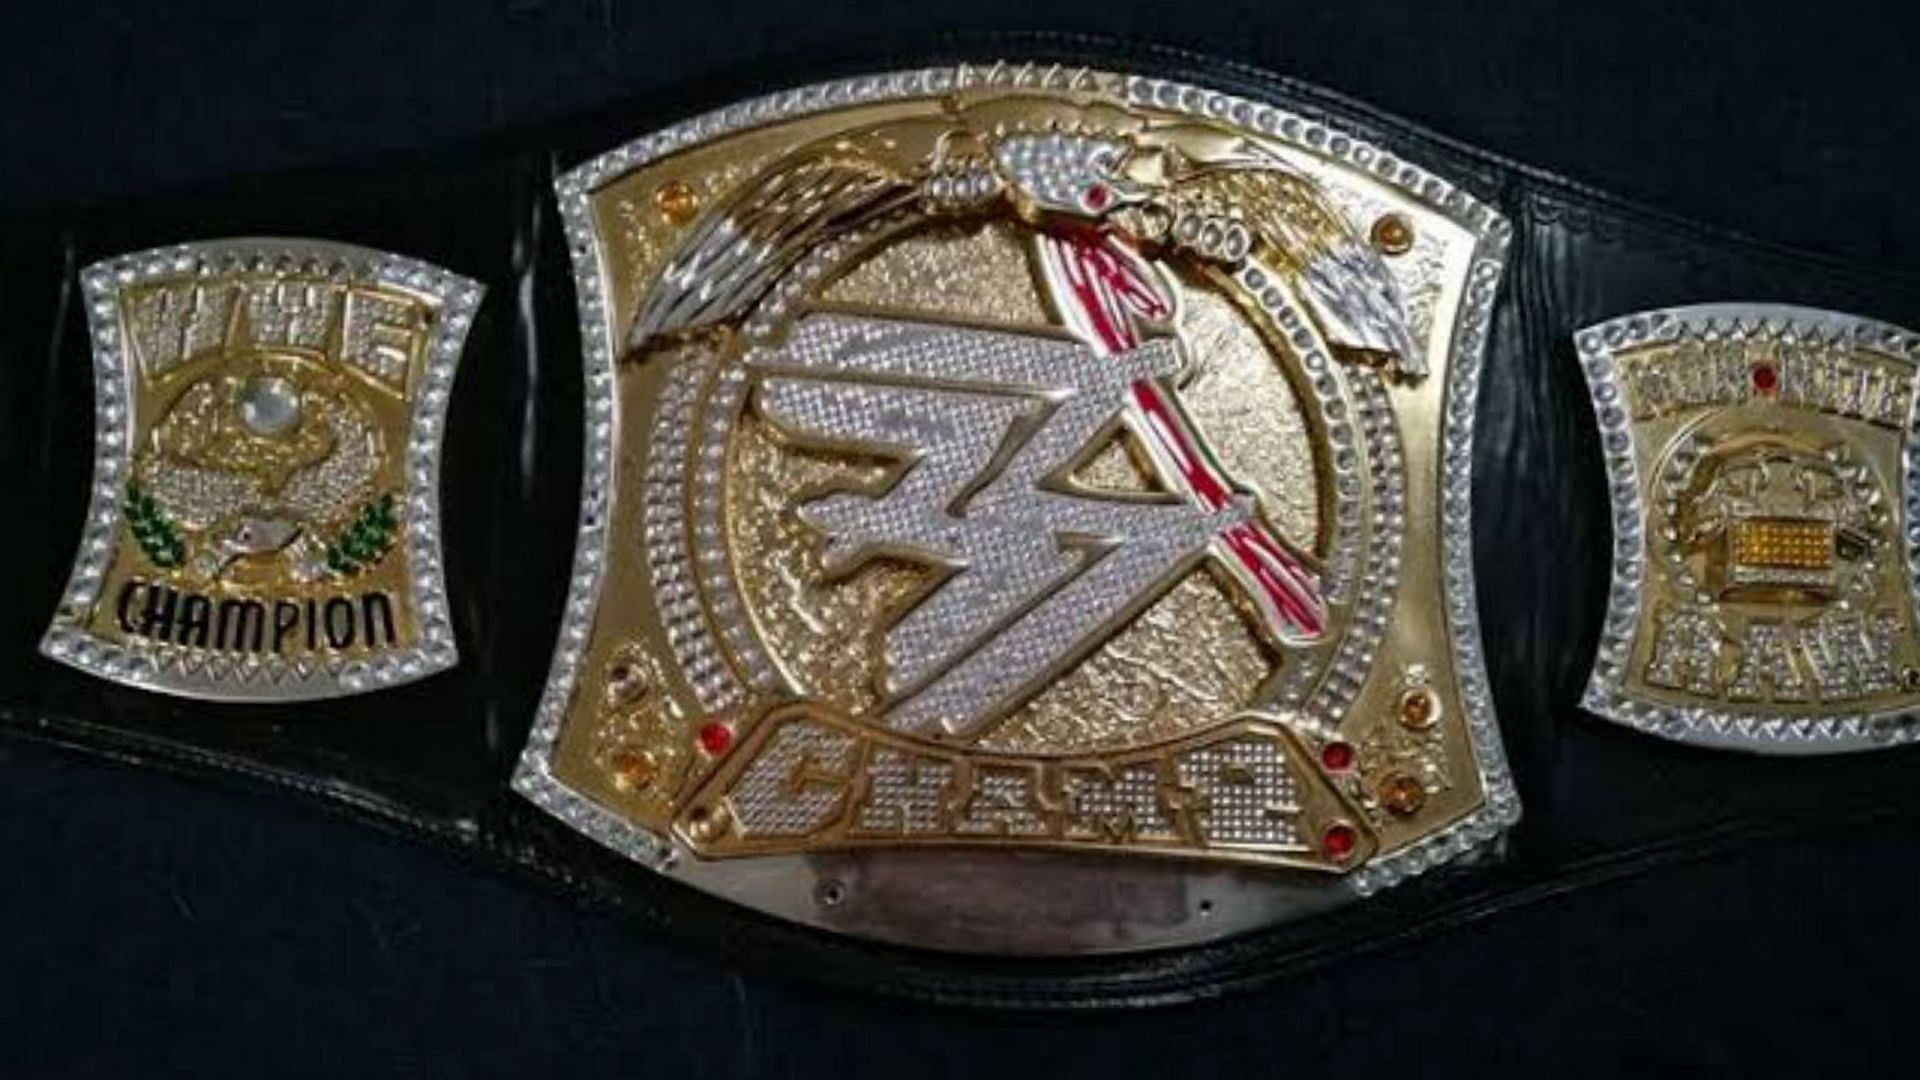 The spinner belt represented WWE Championship from 2005 to 2013.